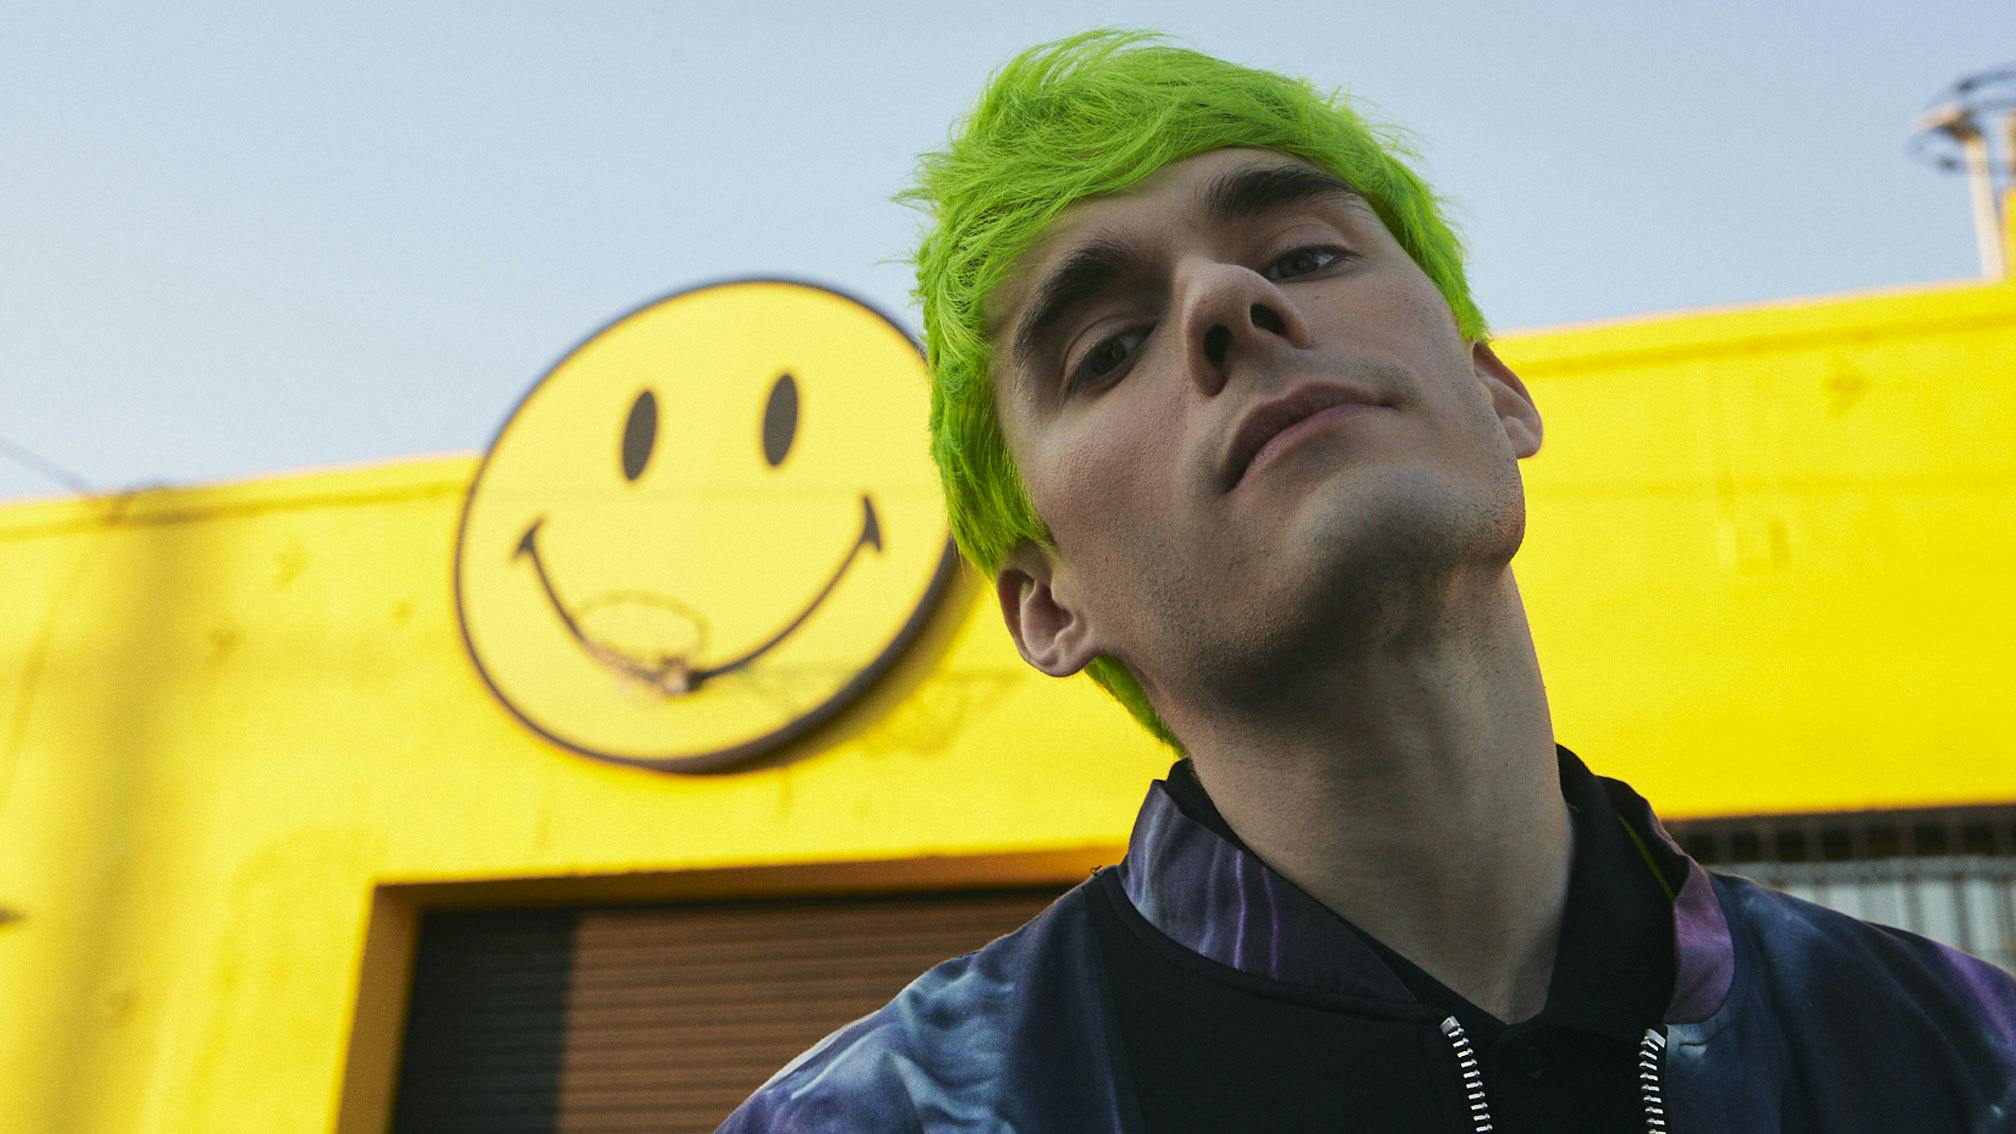 Waterparks’ Awsten Knight: The 10 songs that changed my life